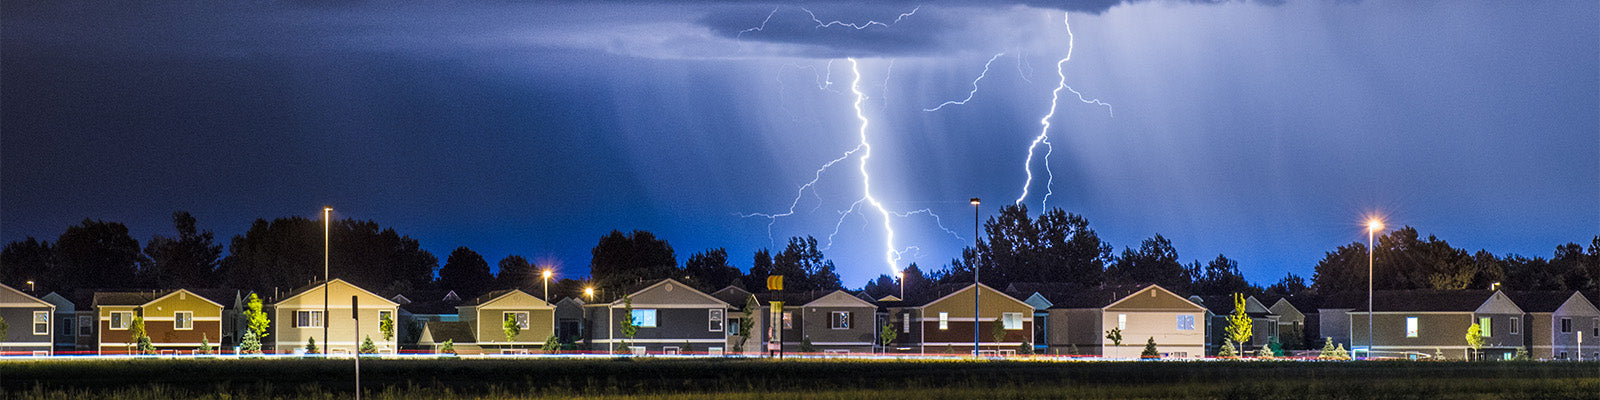 well-lit-house-in-suburb-electrical-storm-overhead-big-crop